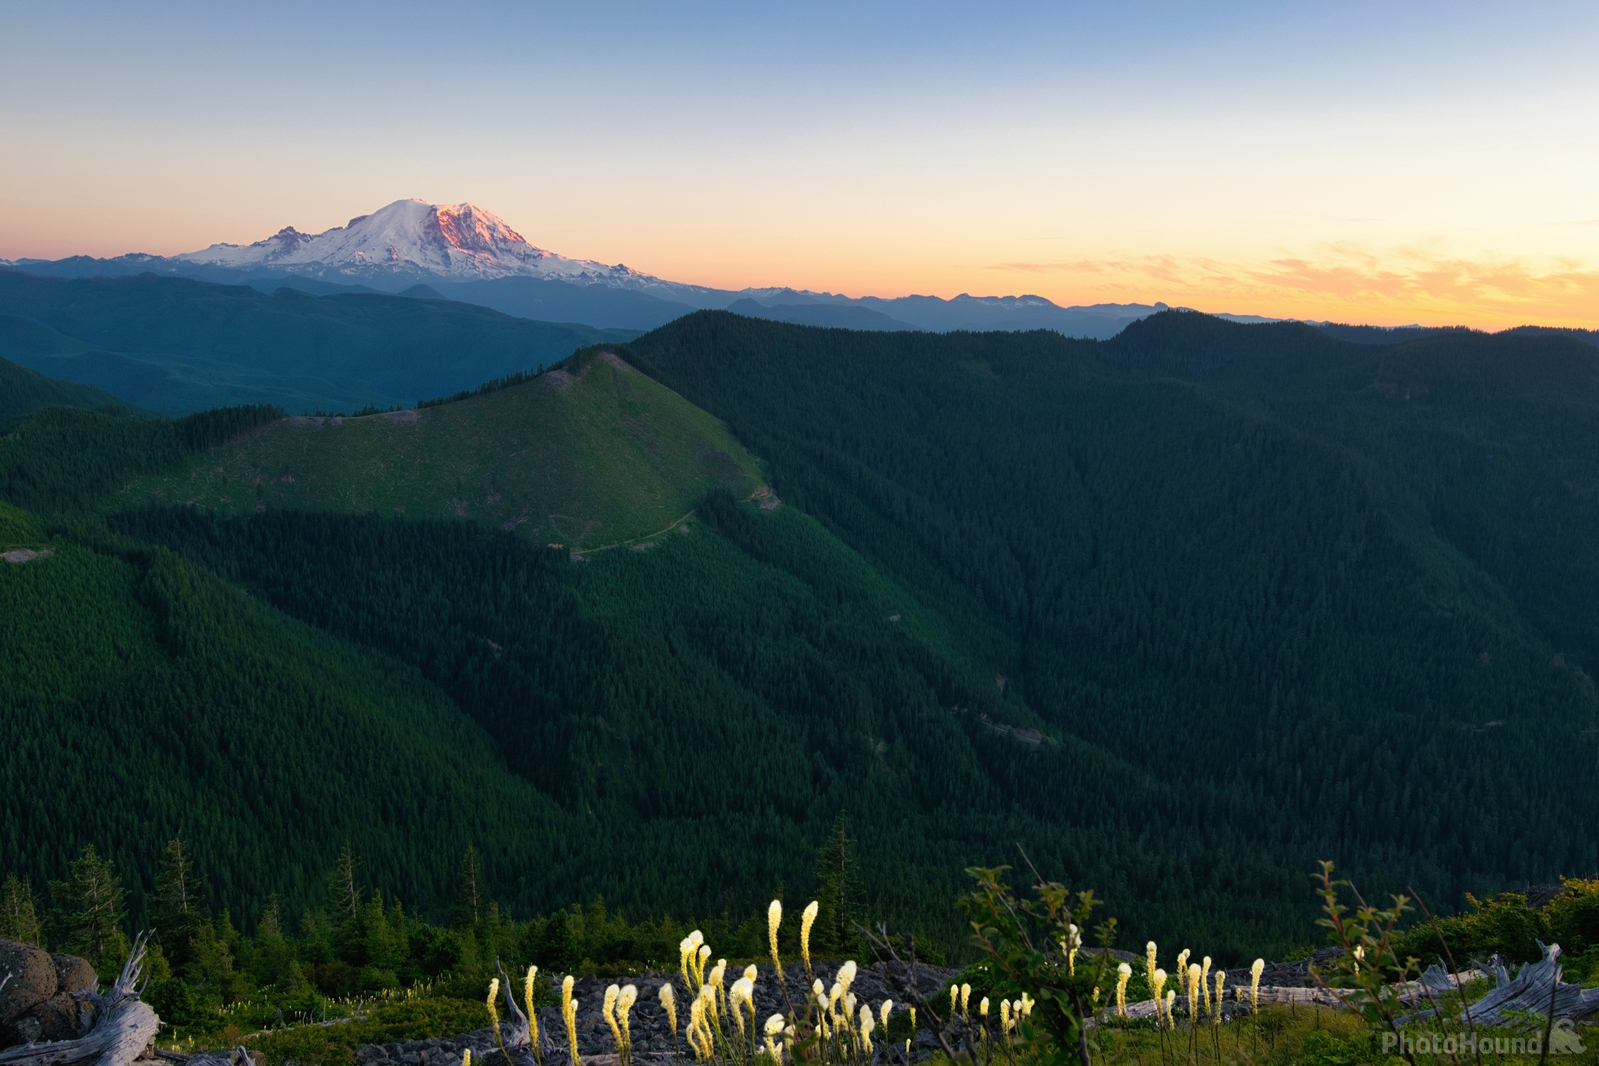 Image of Kelly Butte Lookout by Steve West